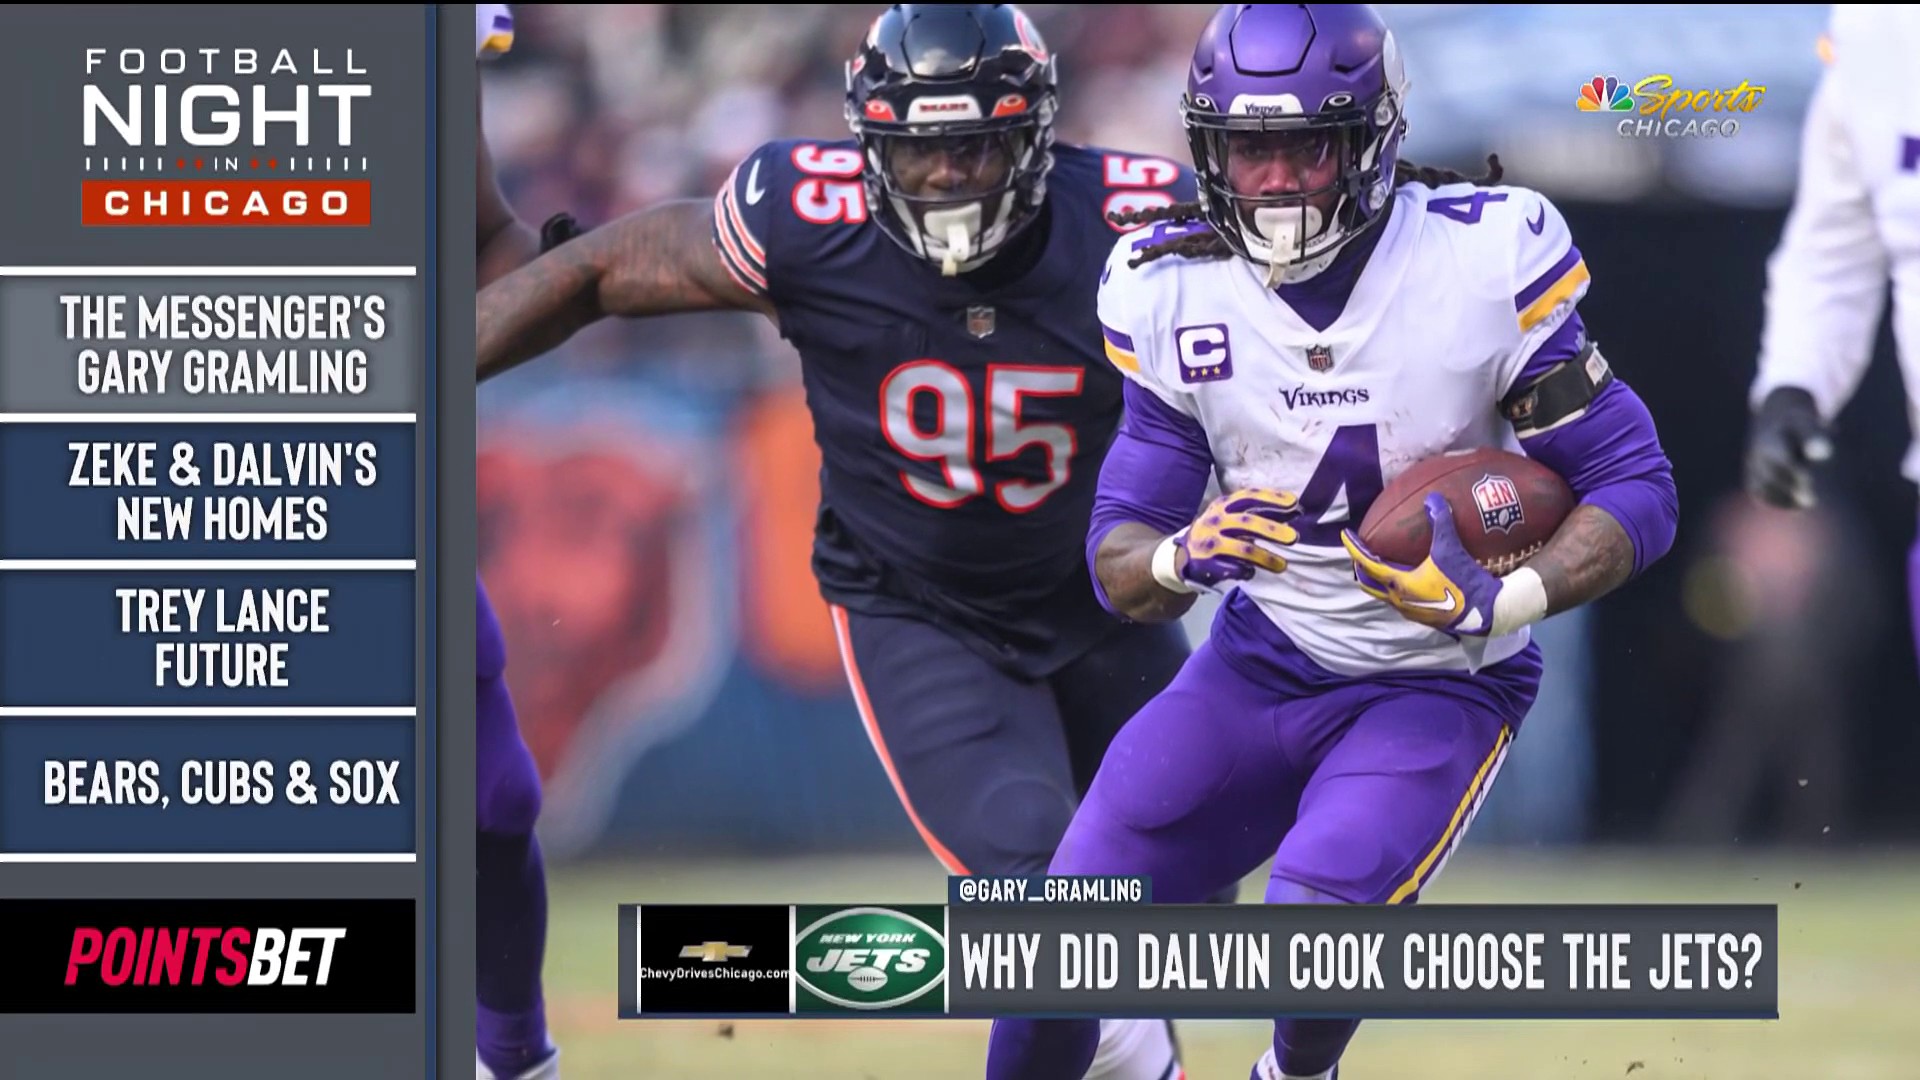 Why did Dalvin Cook choose to sign with the Jets? – NBC Sports Chicago